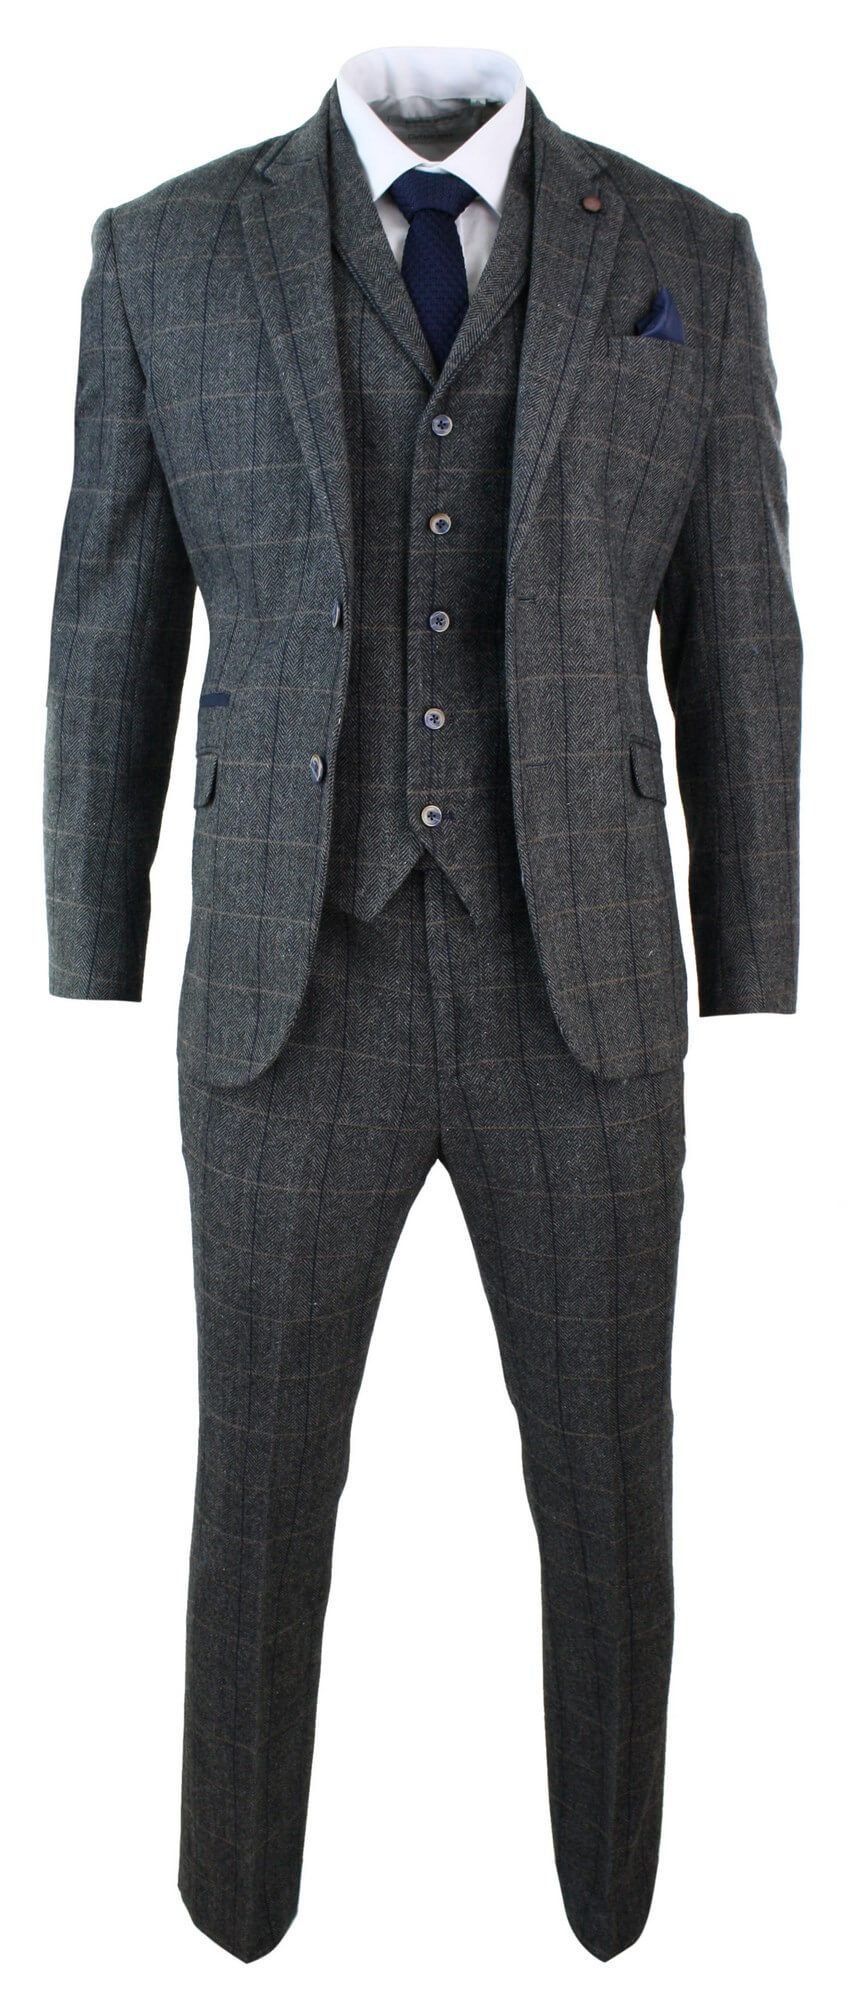 Mens Wool Tweed Peaky Blinders Suit 3 Piece Authentic 1920s Tailored Fit Classic